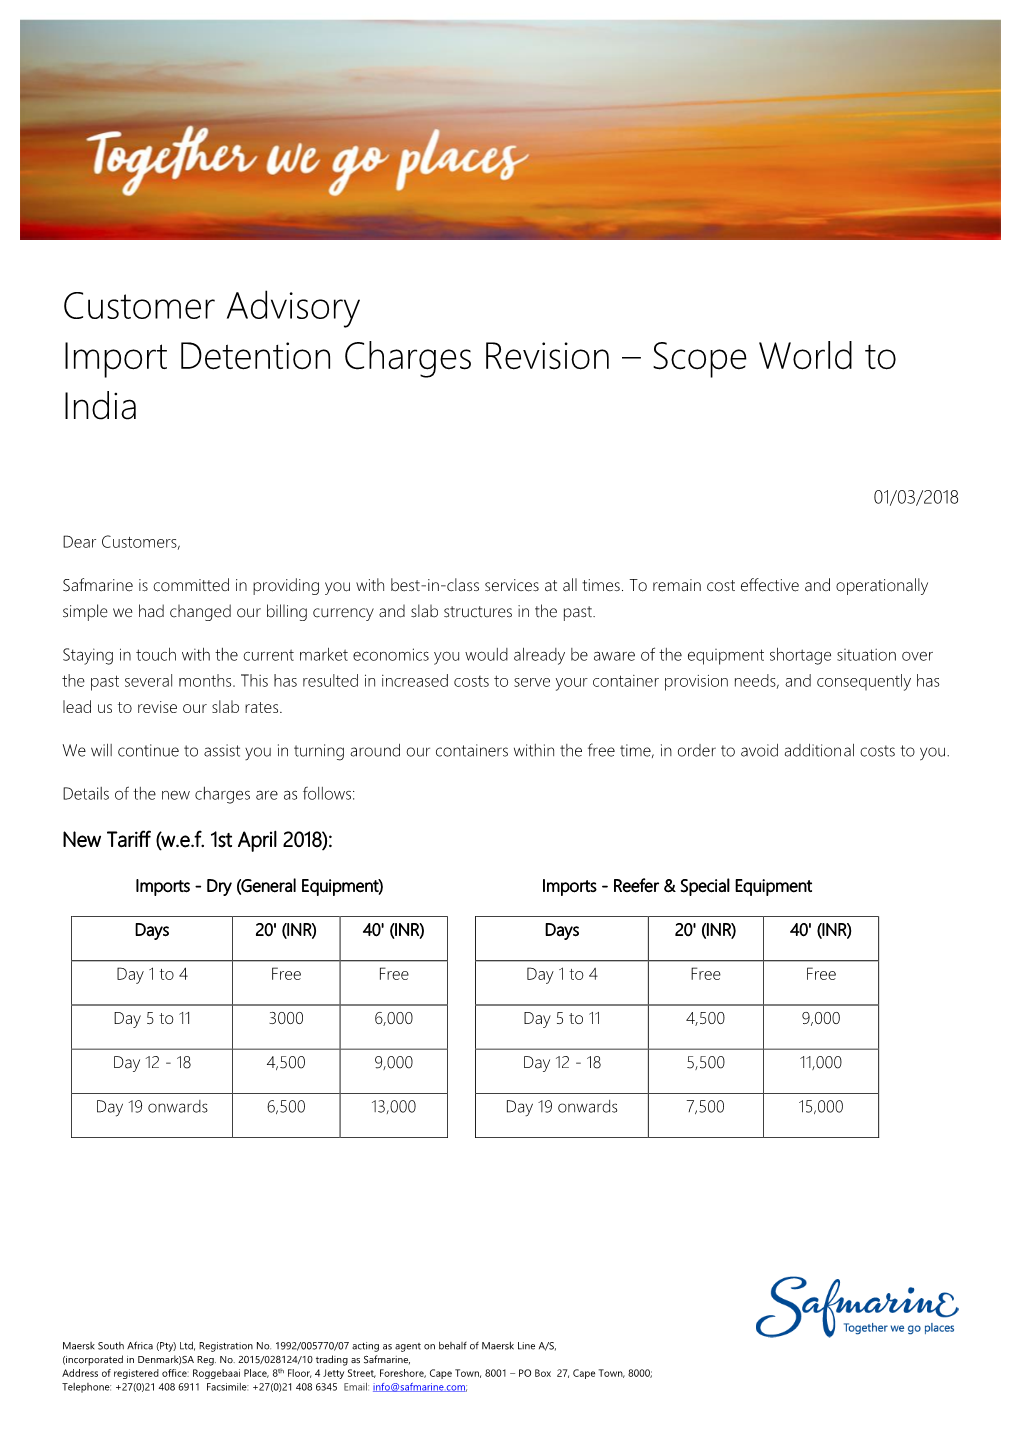 Customer Advisory Import Detention Charges Revision – Scope World to India